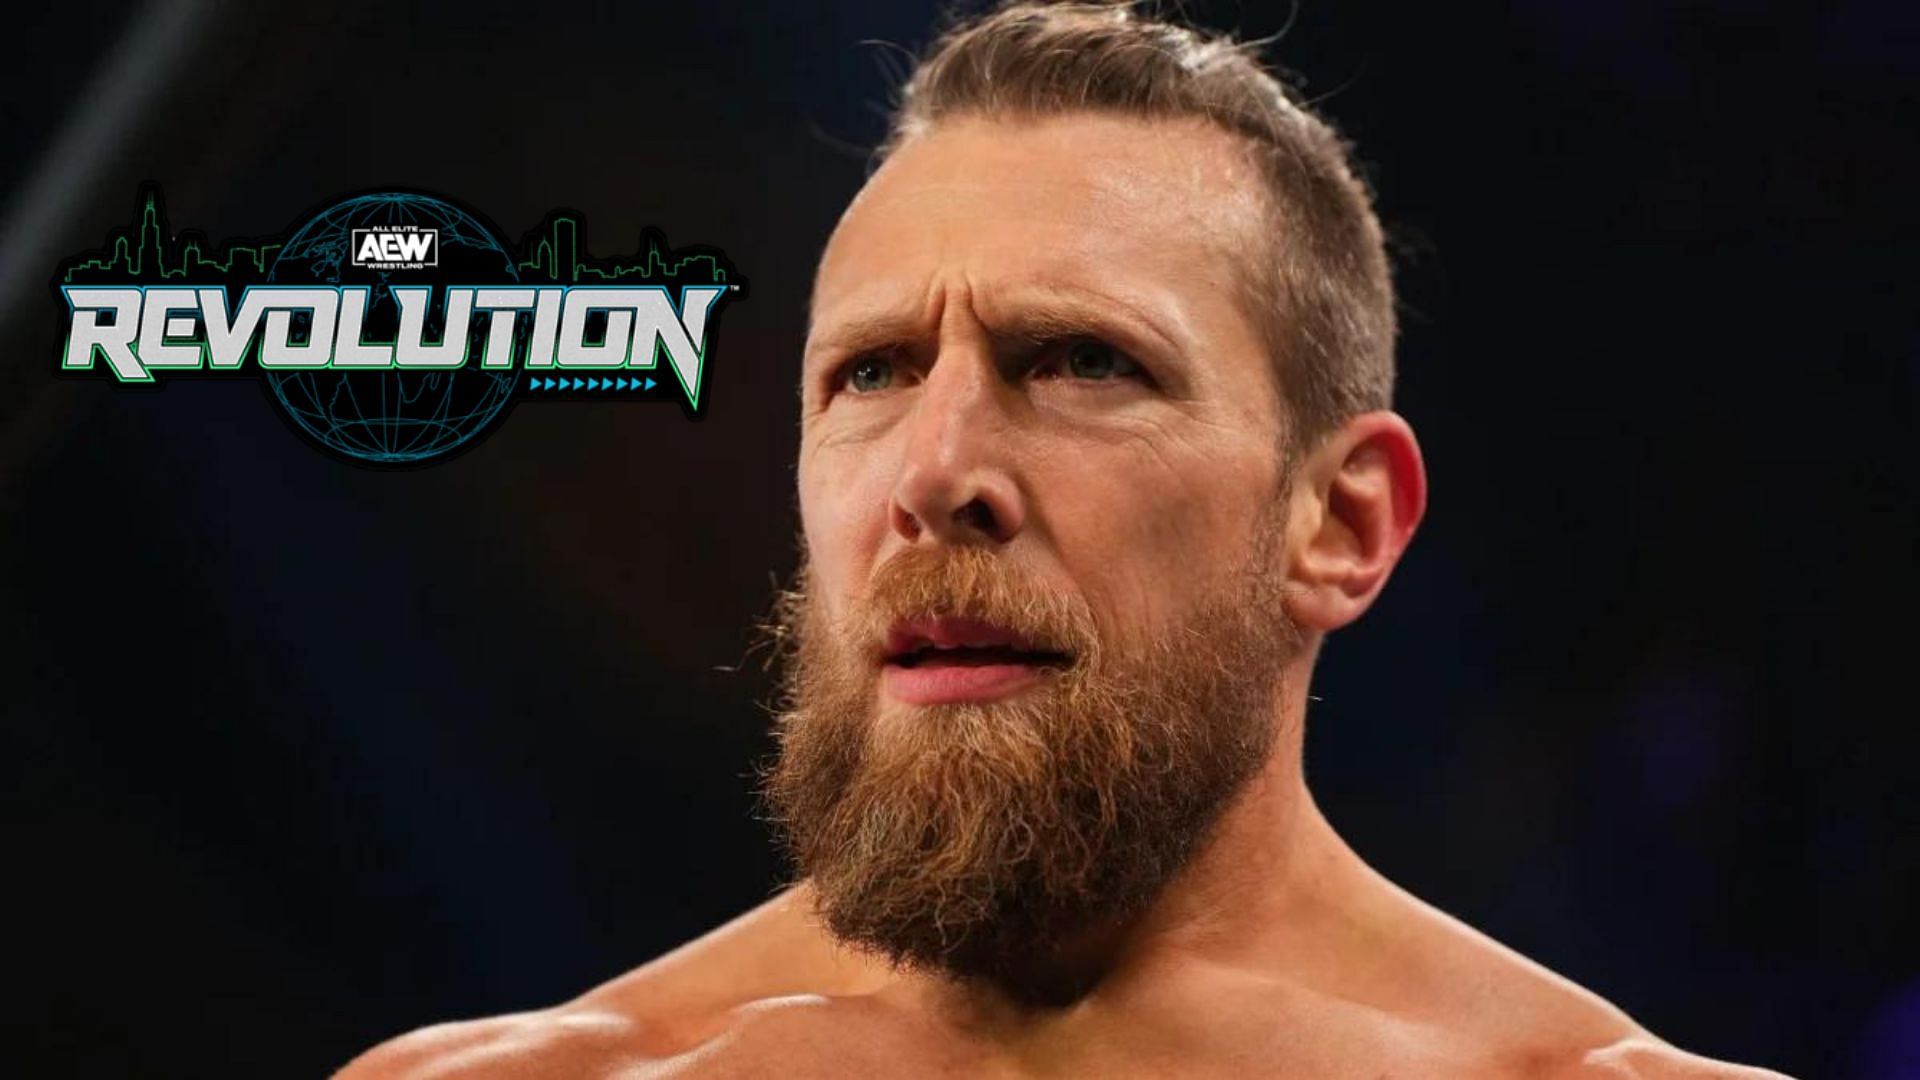 AEW star Bryan Danielson will challenge MJF for the world title